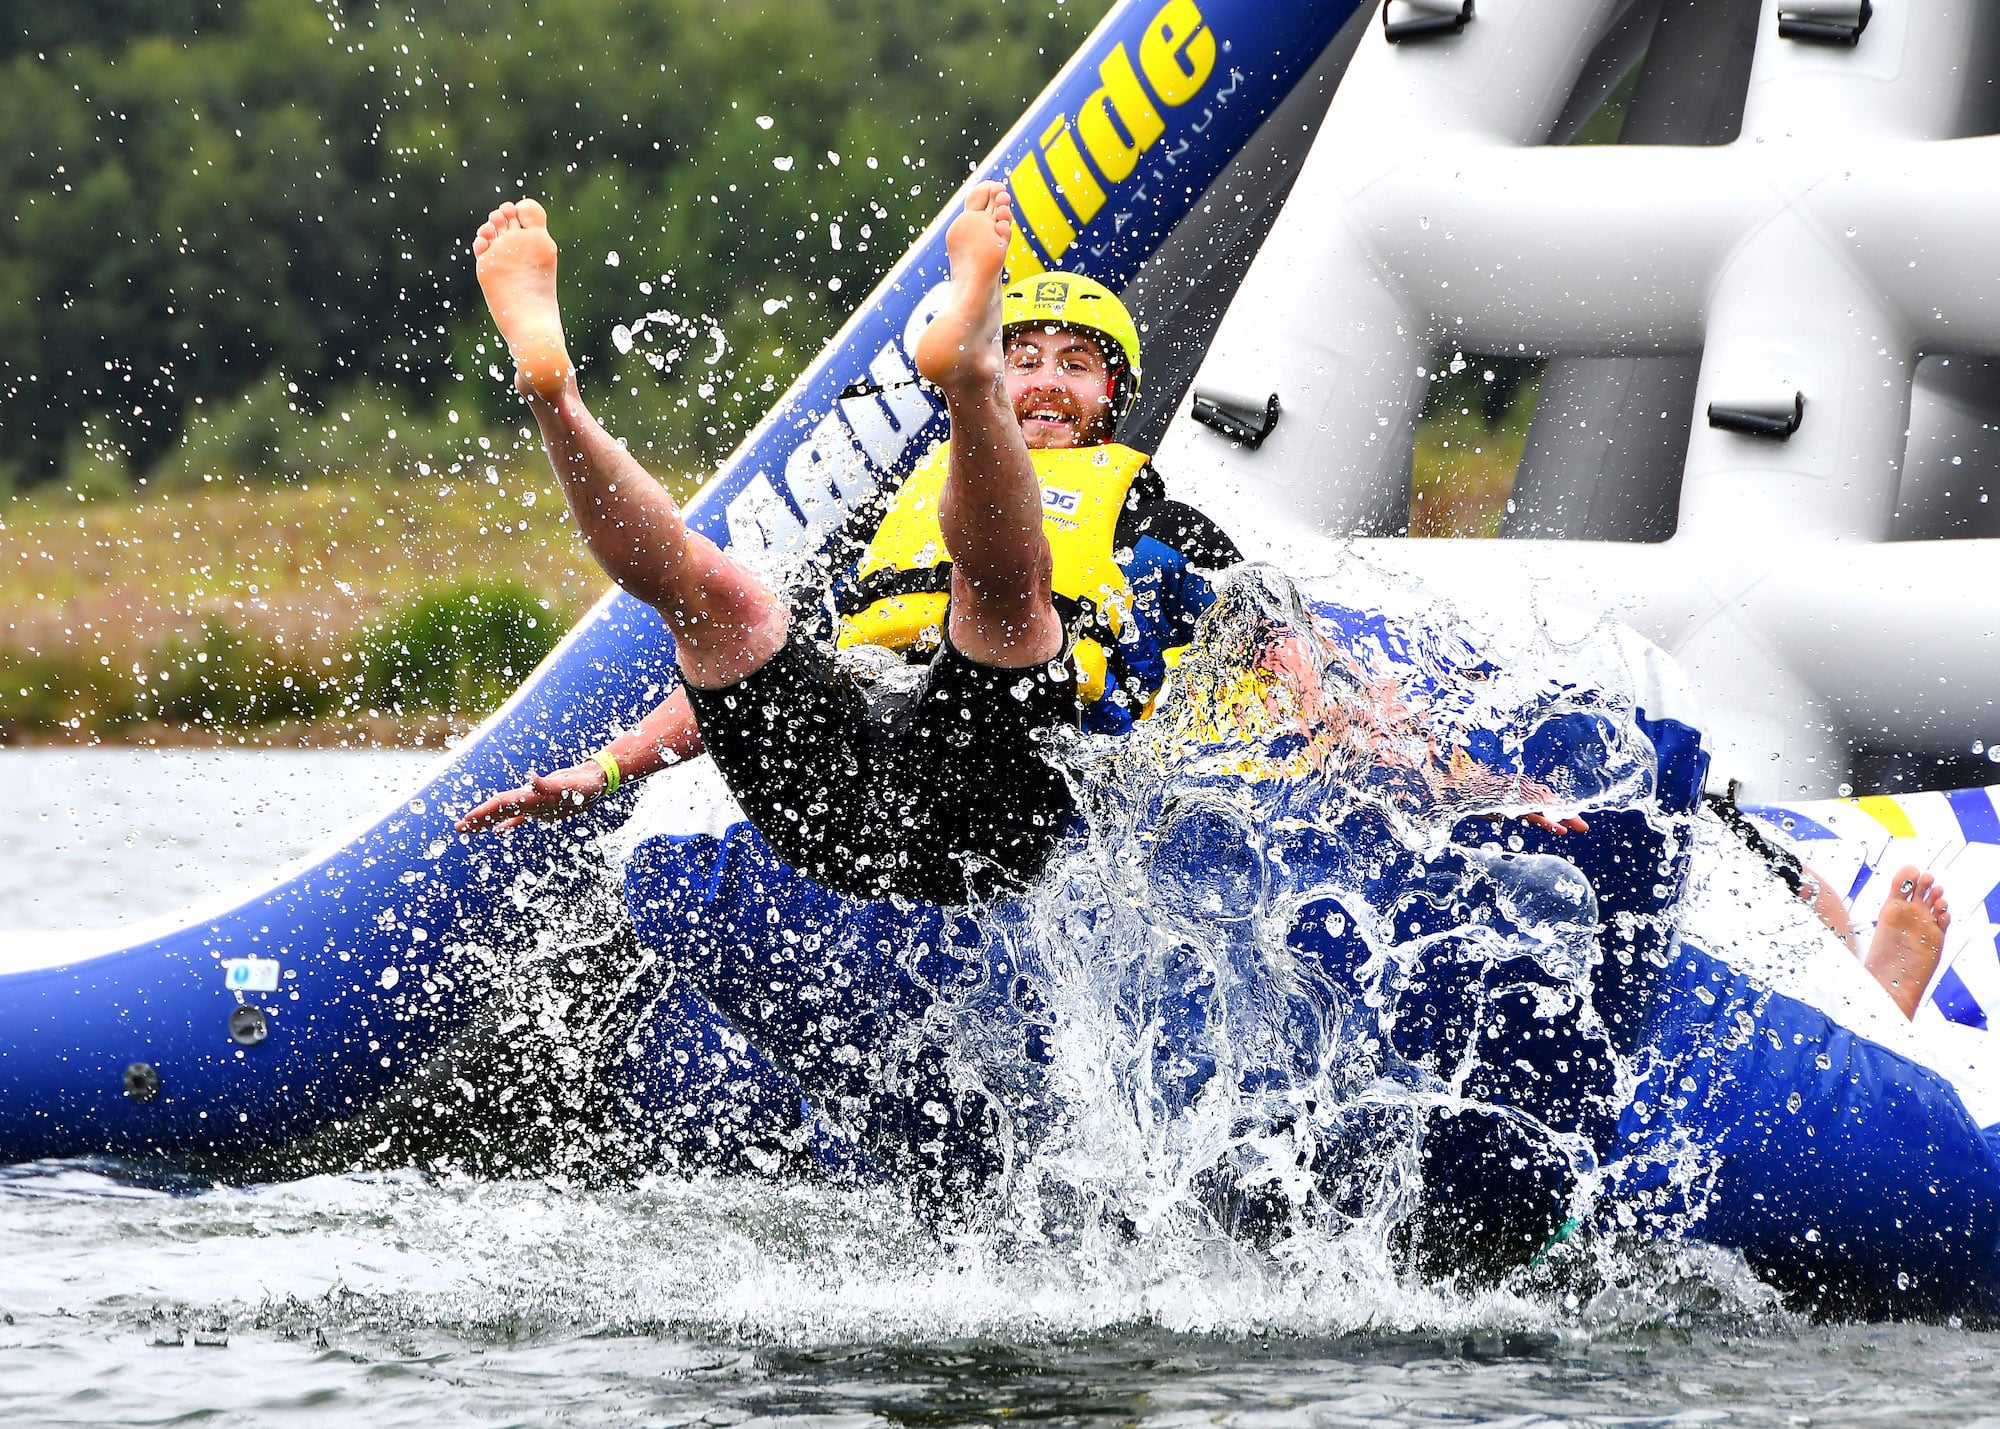 A man flies off the end of an inflatable slide, water splashed around him